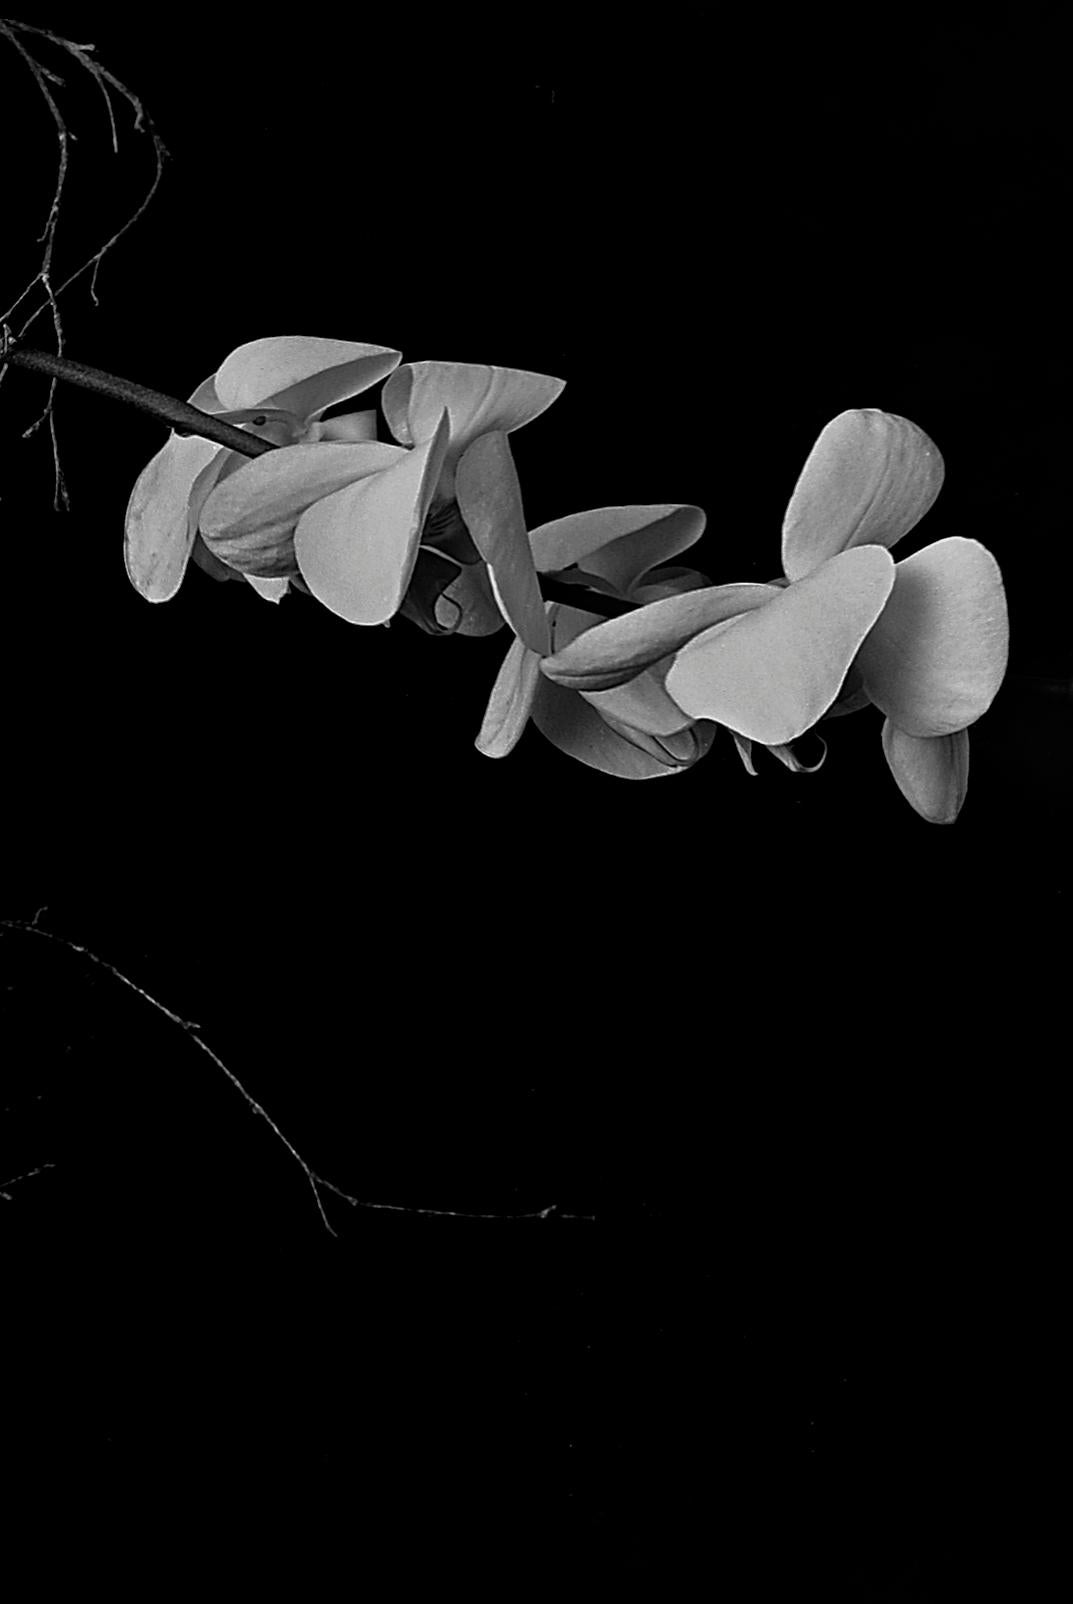 Signed limited edition still-life print, Black white nature, Romantic- Orchids - Contemporary Photograph by Ian Sanderson